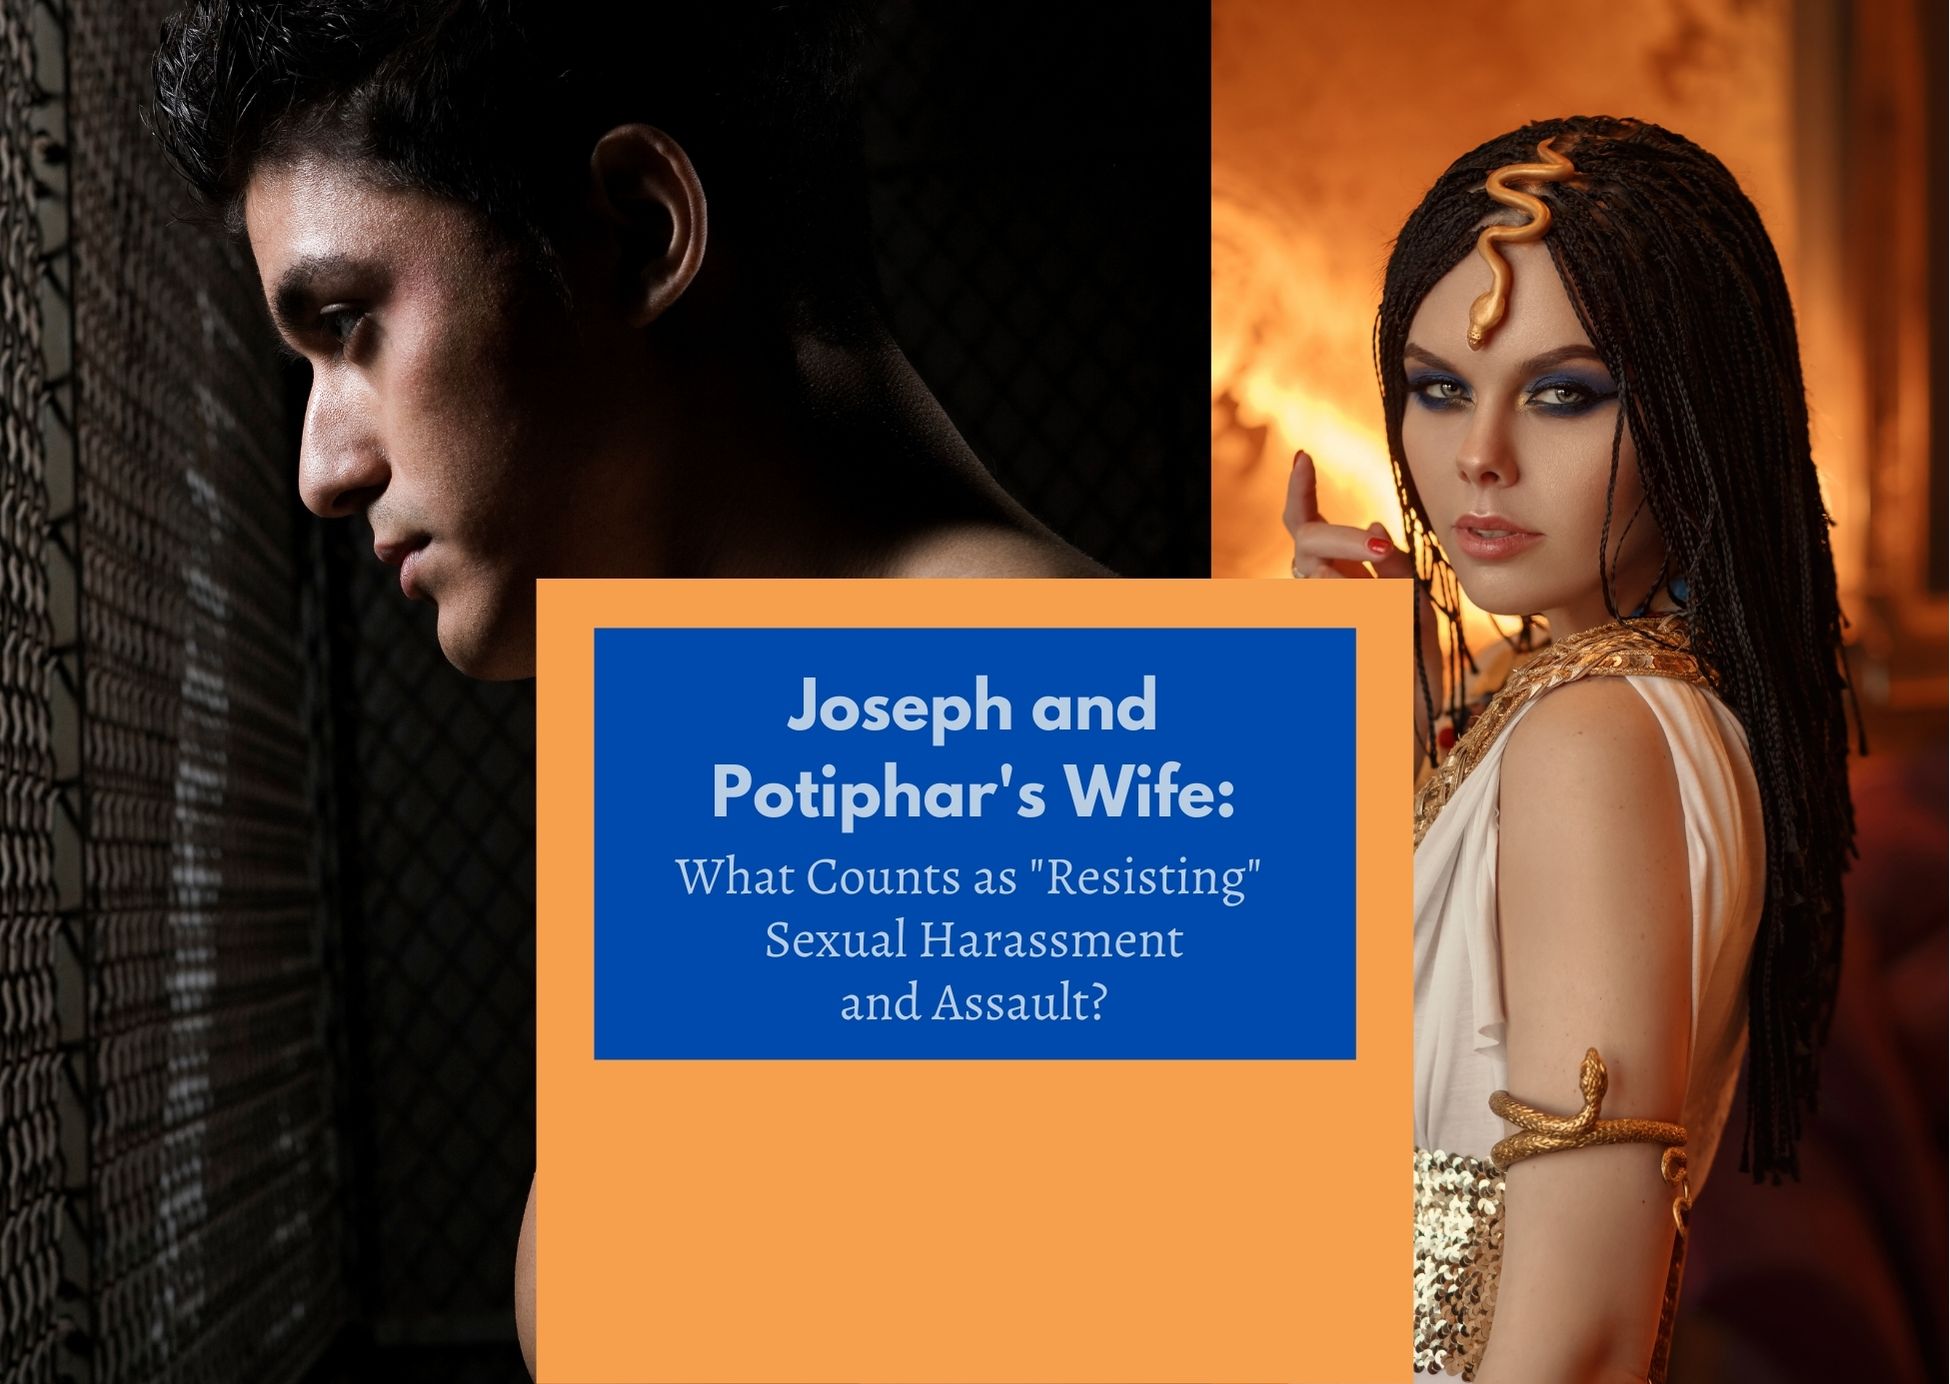 Joseph and Potiphars Wife Resisting Sexual Harassment and Assault Life-Saving Divorce picture